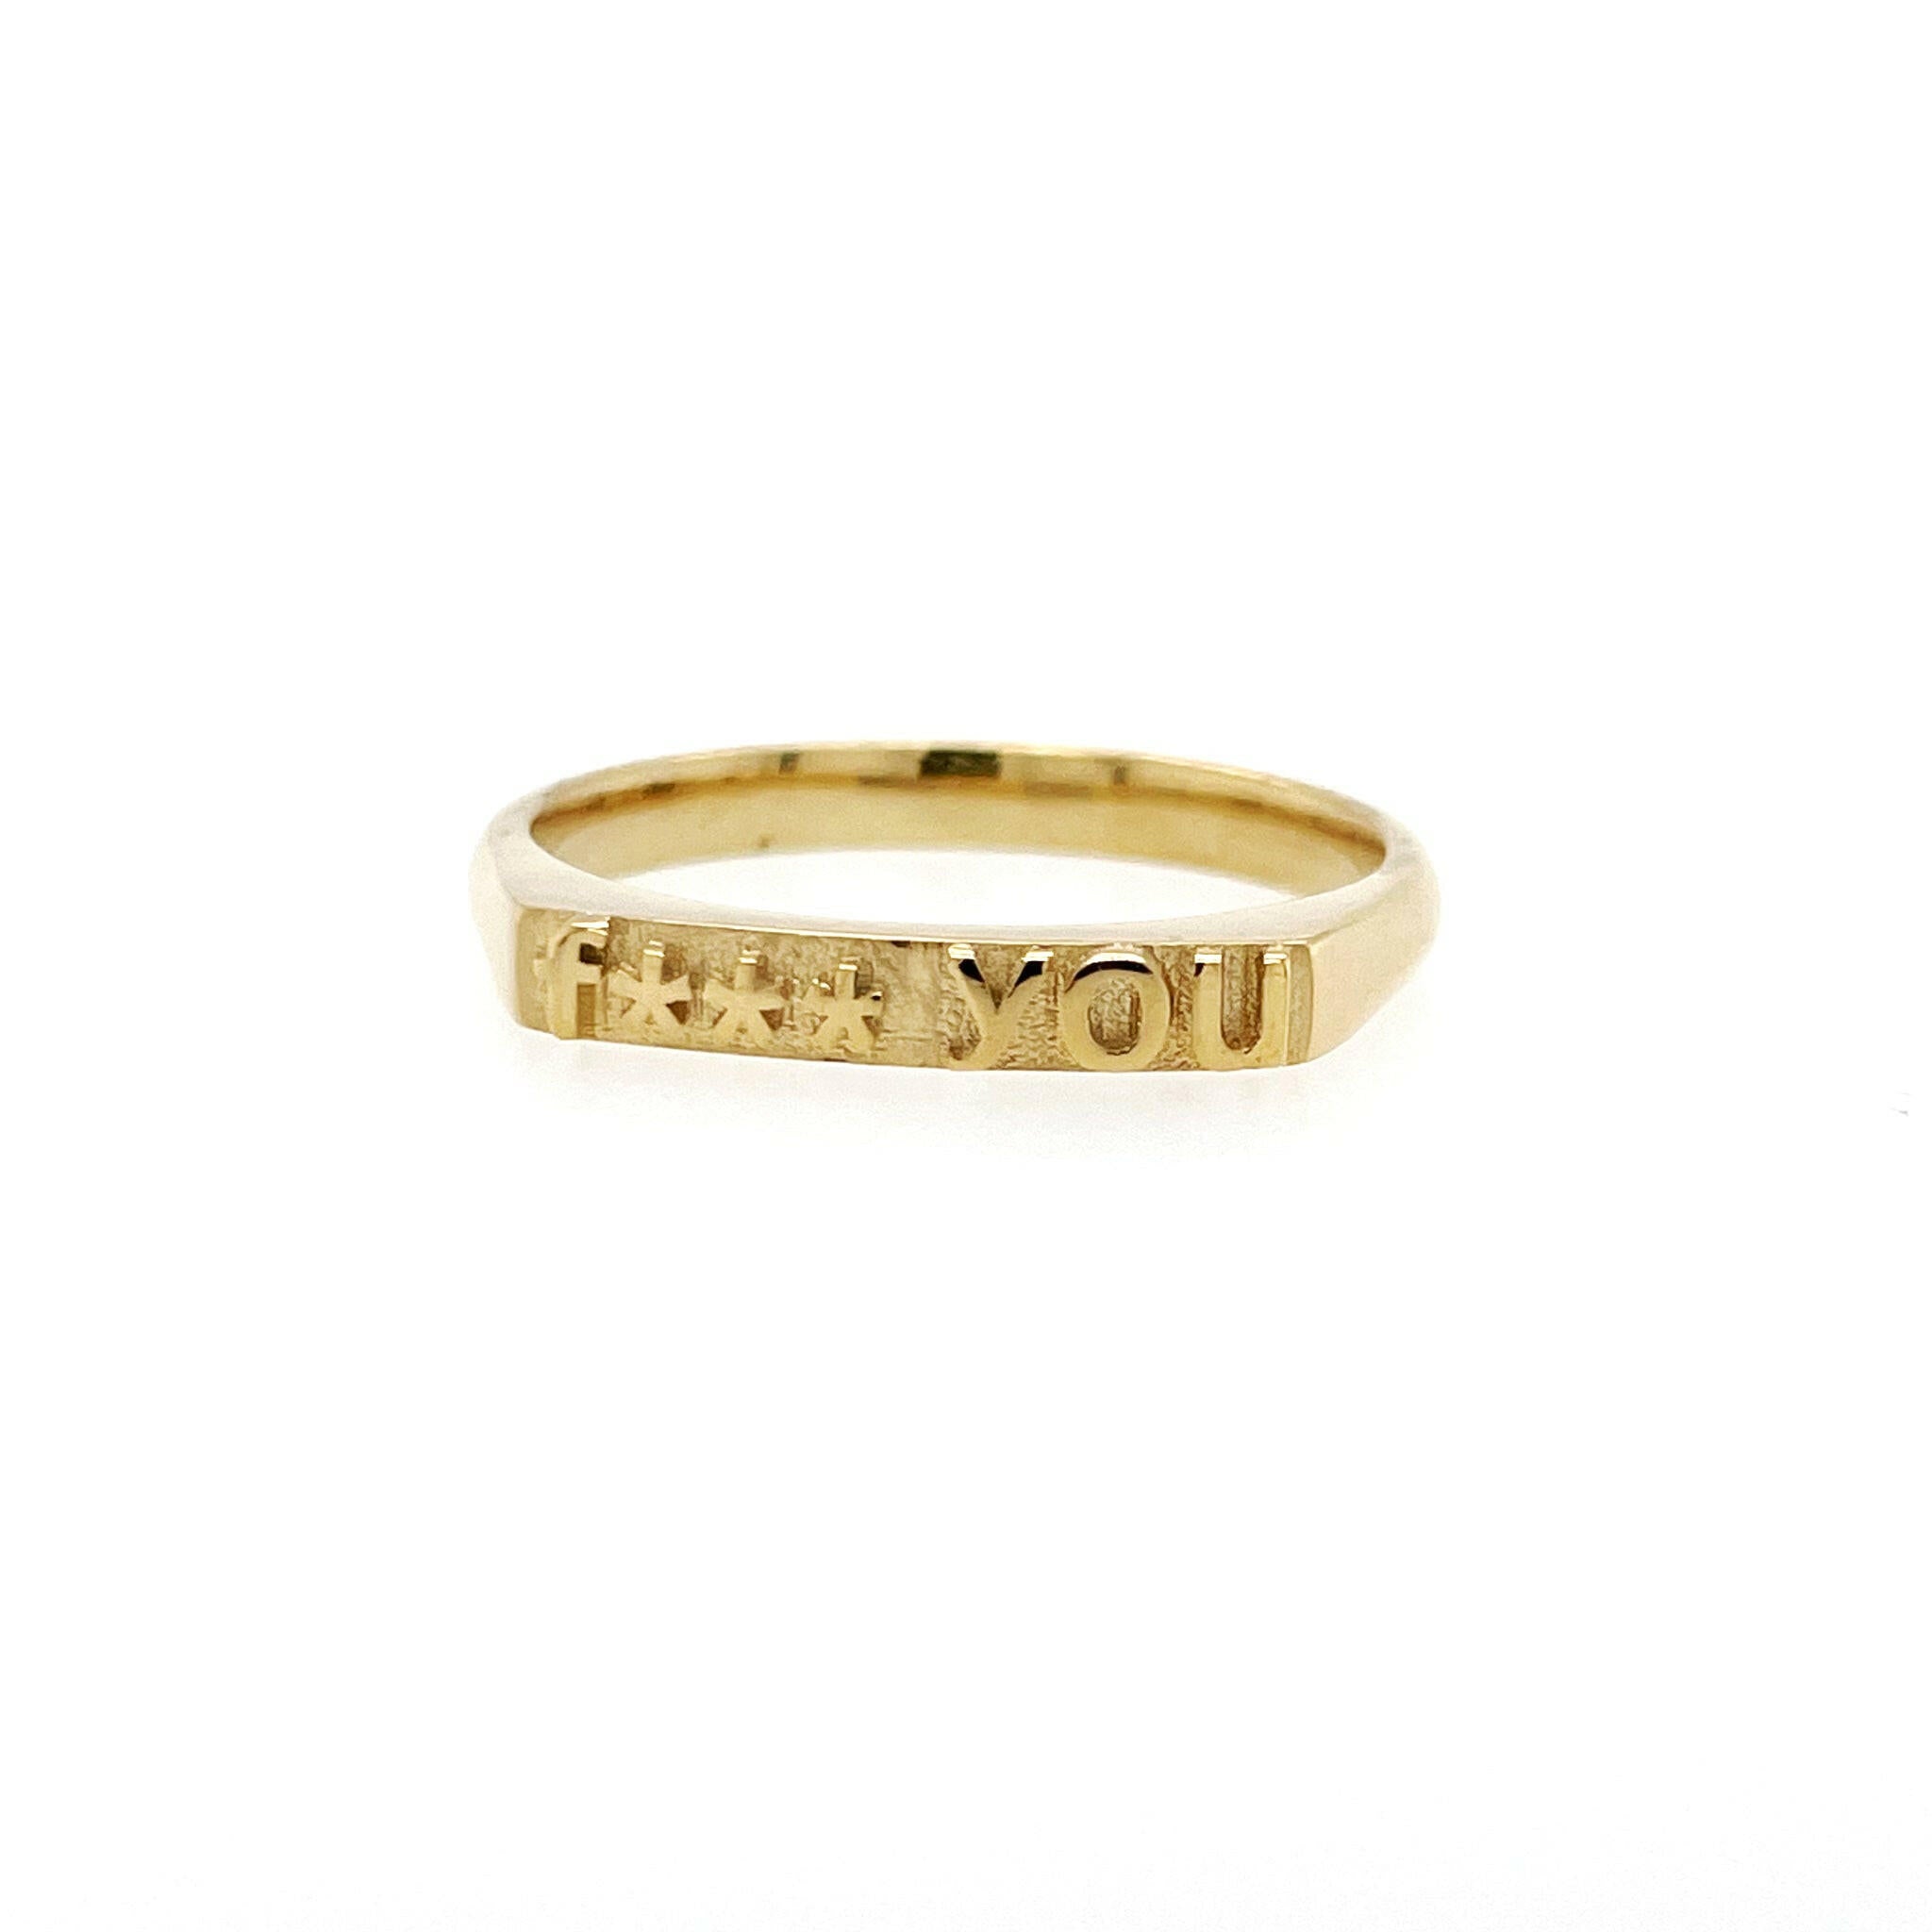 front view of ring in 14 karat yellow gold with text that reads "fuck you" but with 4 asterisks to censor fuck, therefore says "f*** you"